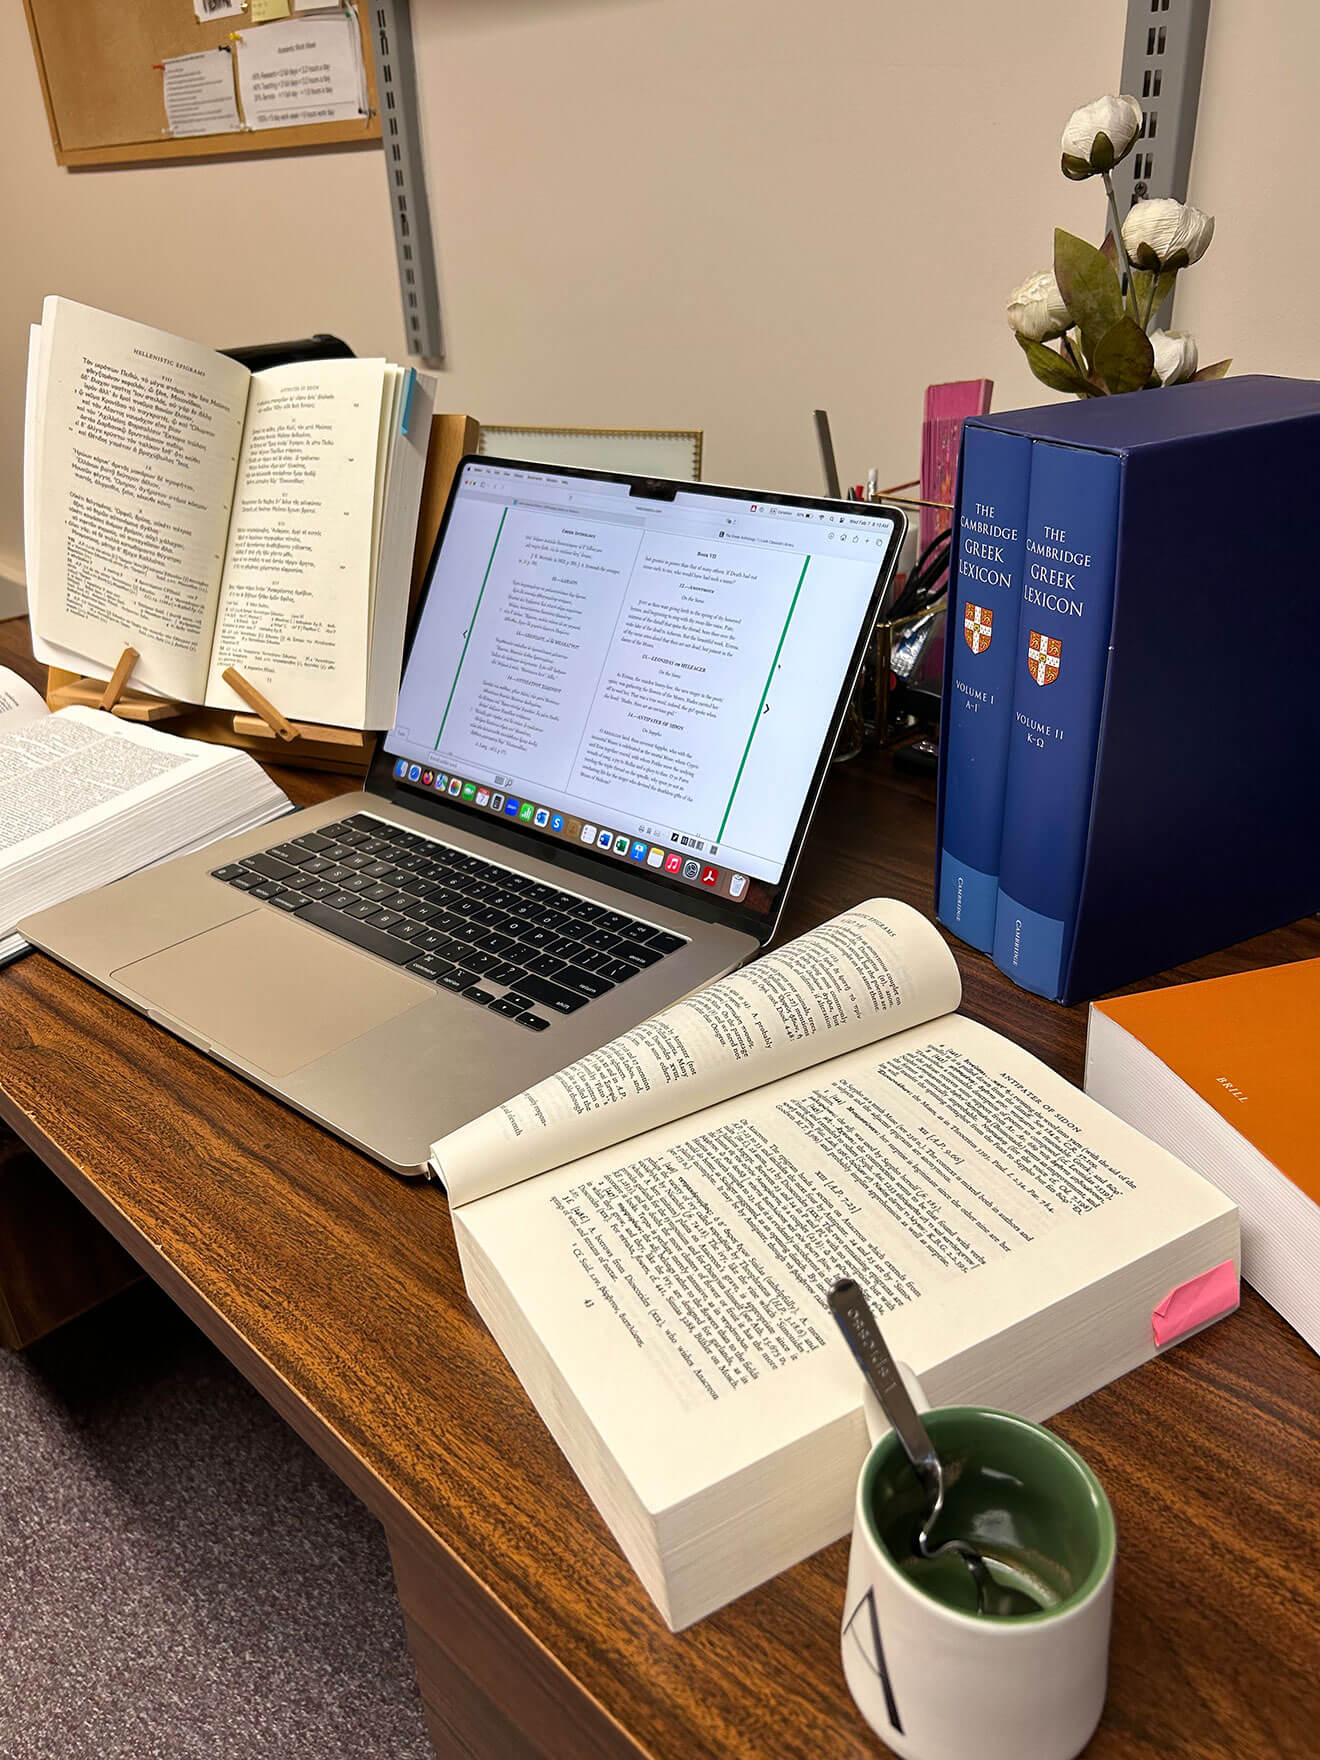  A laptop at a desk, surrounded by three open books and a cup.